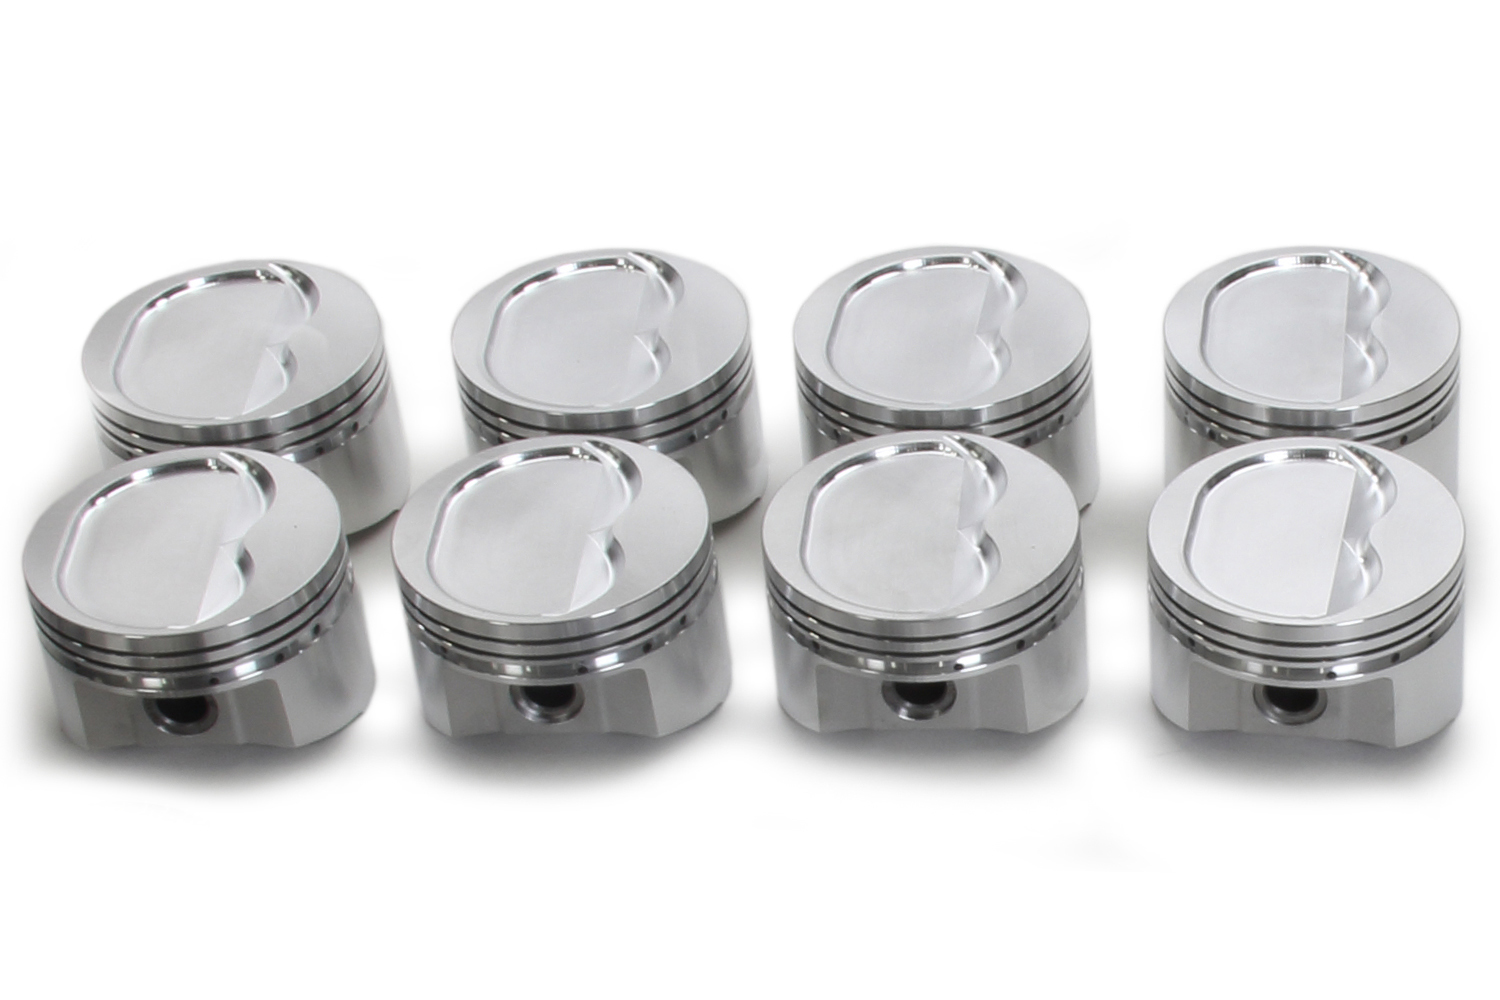 SRP Pistons 139632 Piston, 350 Inverted Dome, Forged, 4.030 in Bore, 1/16 x 1/16 x 3/16 in Ring Grooves, Minus 24.00 cc, Small Block Chevy, Set of 8